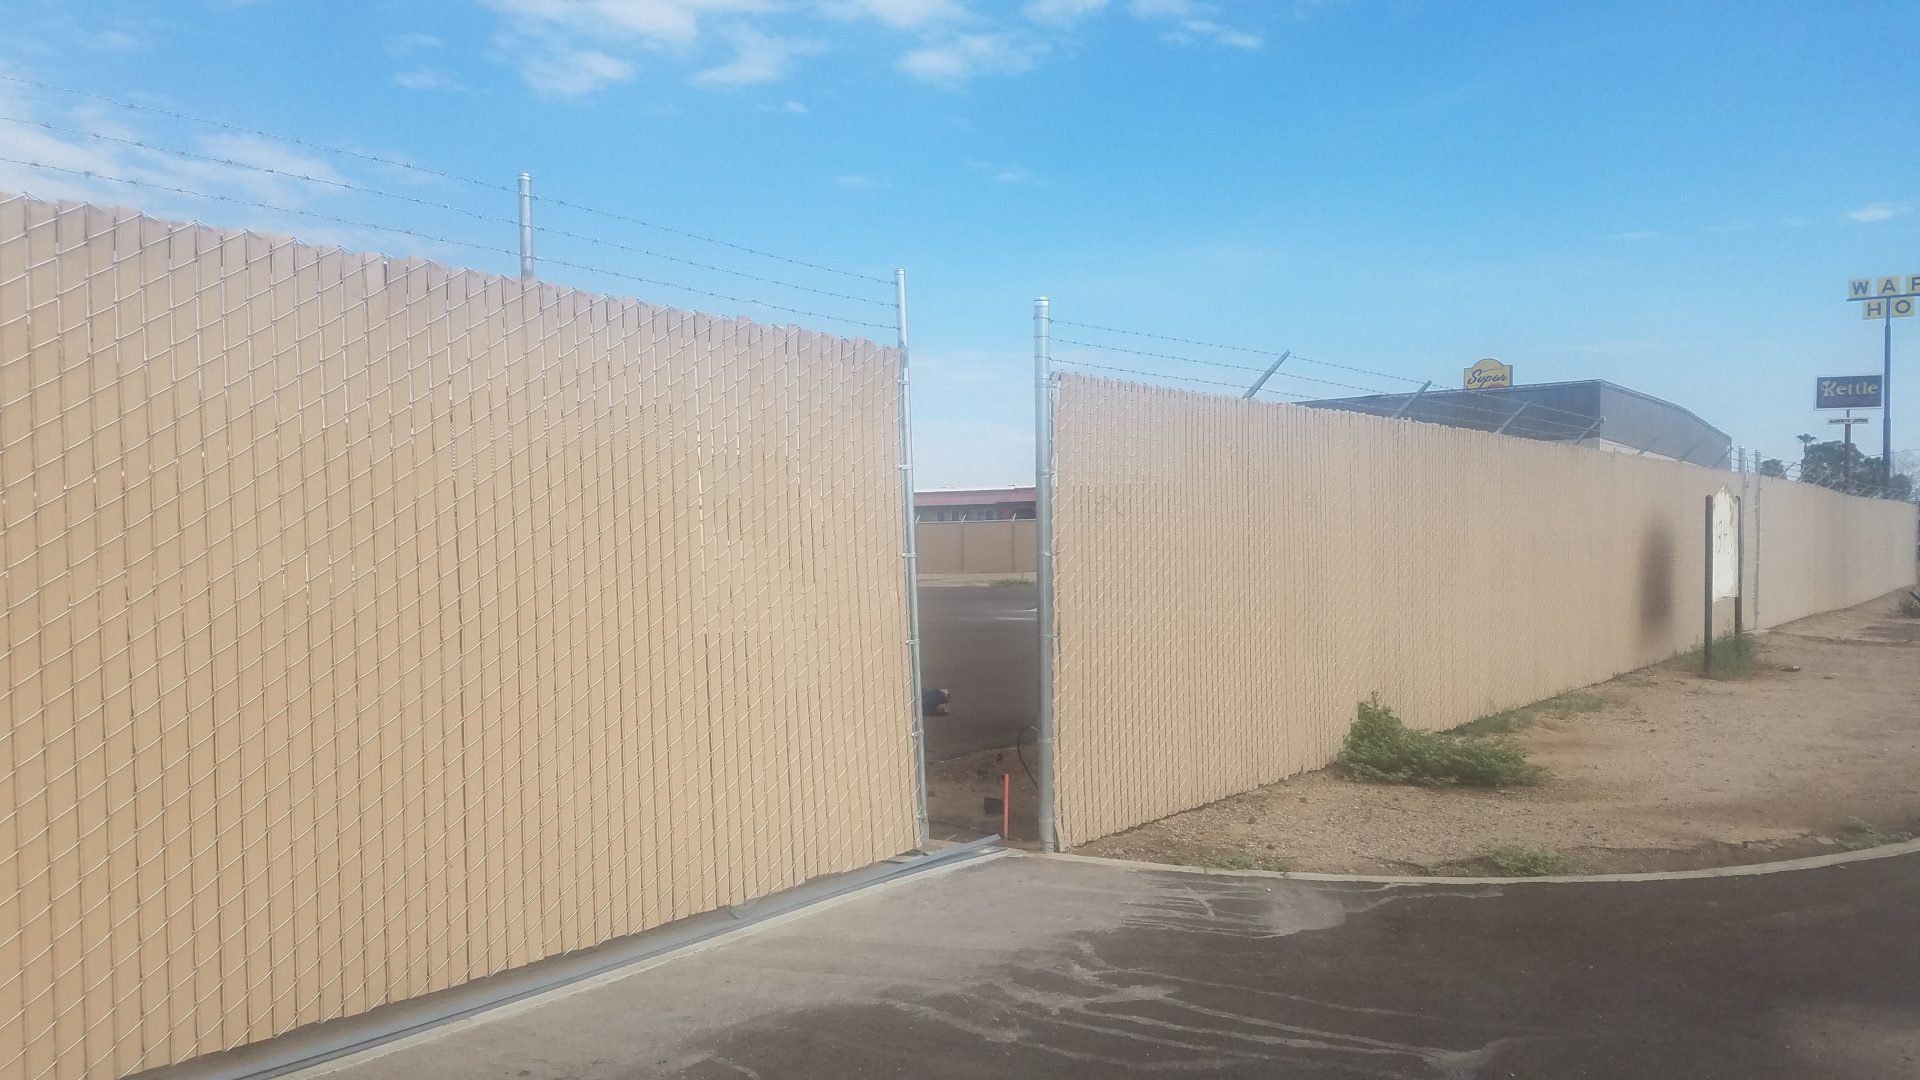 Fence with Privacy Slats — Fence Rentals in Tucson, AZ